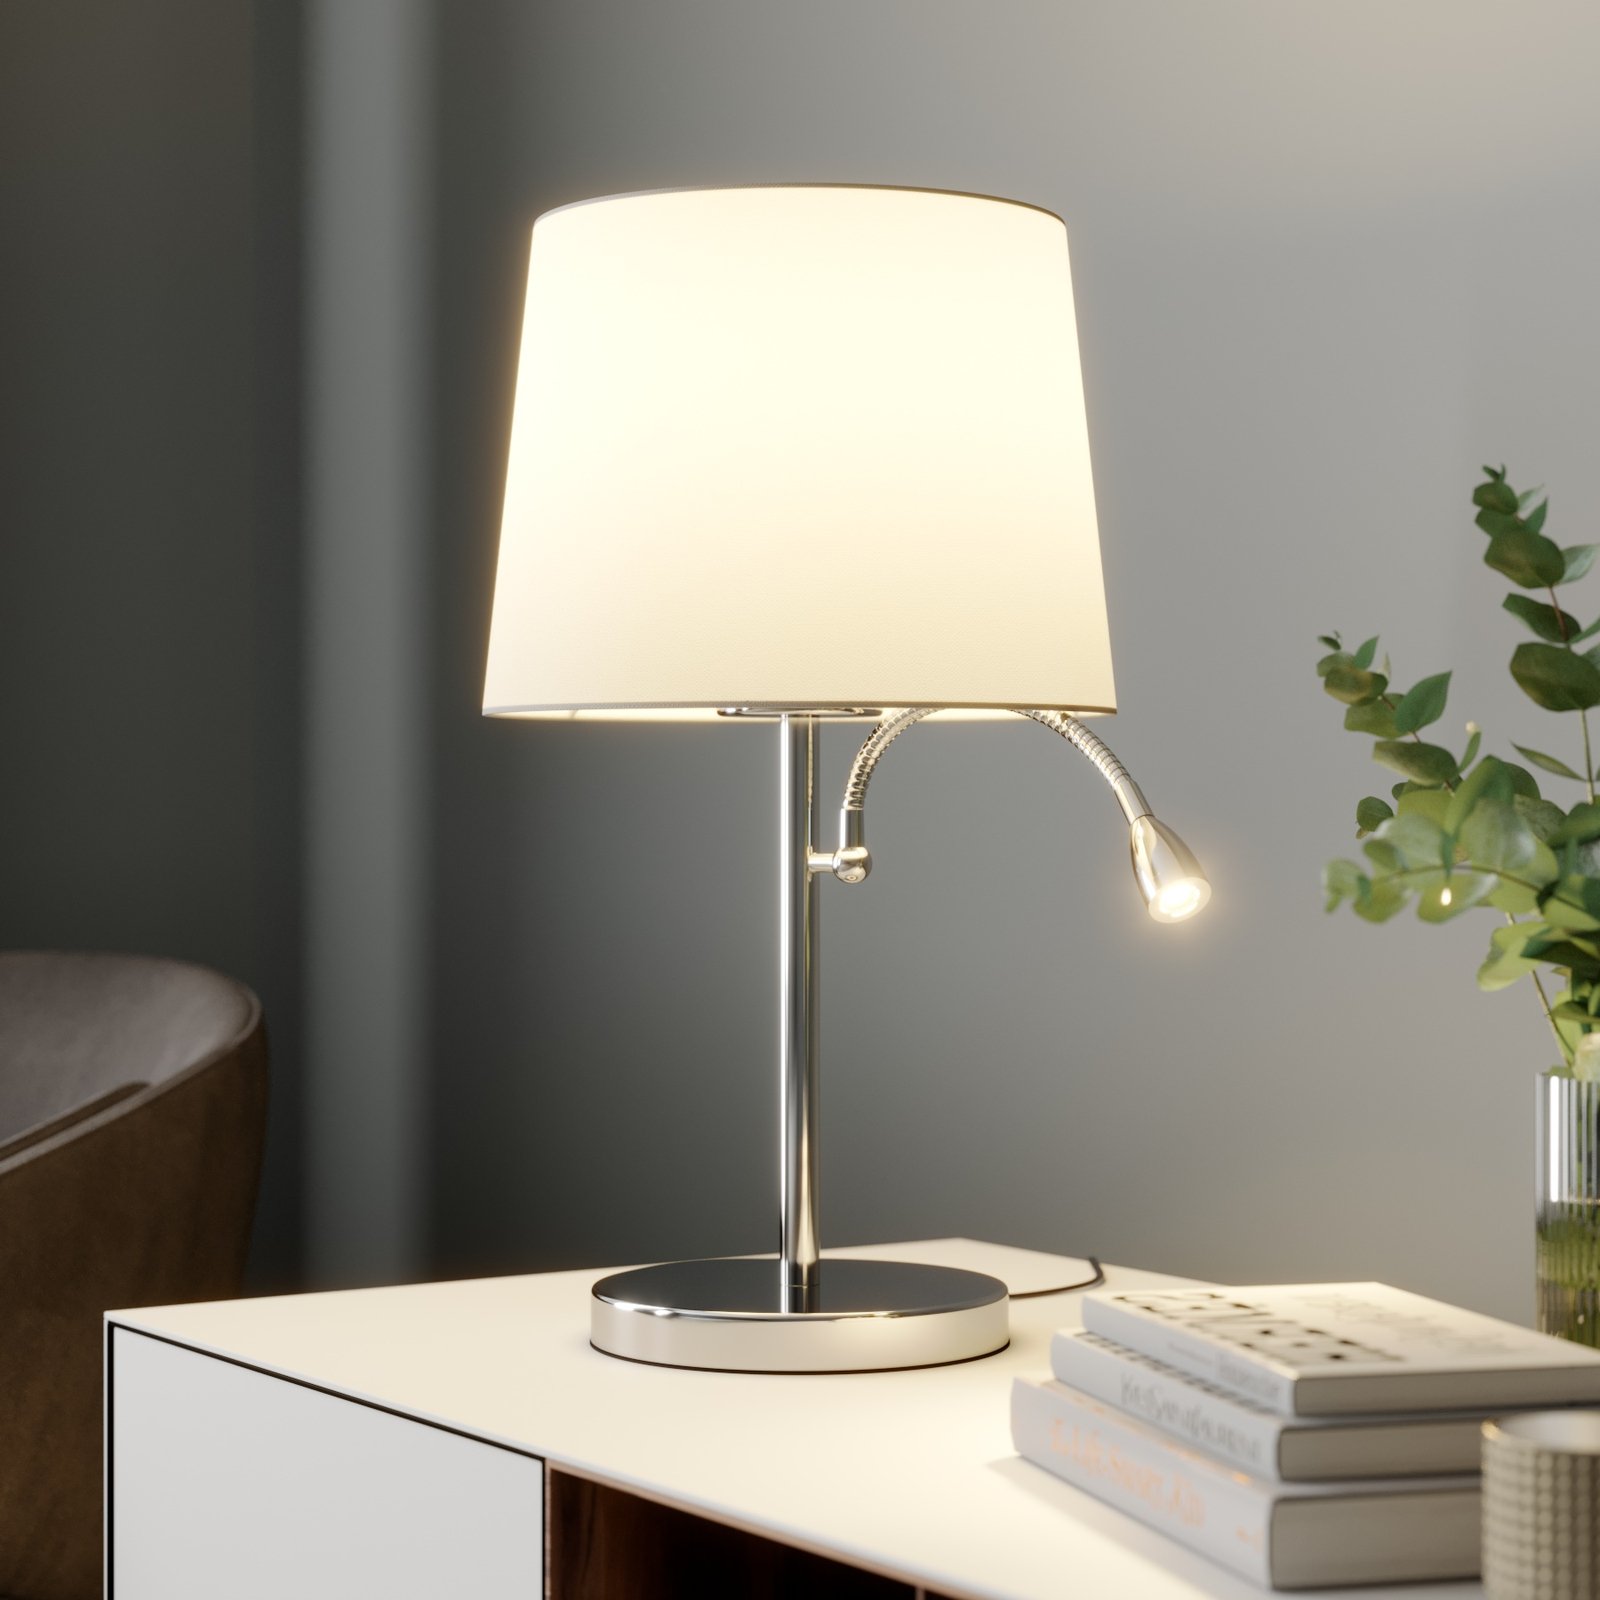 Fabric table lamp Benjiro with an LED reading lamp